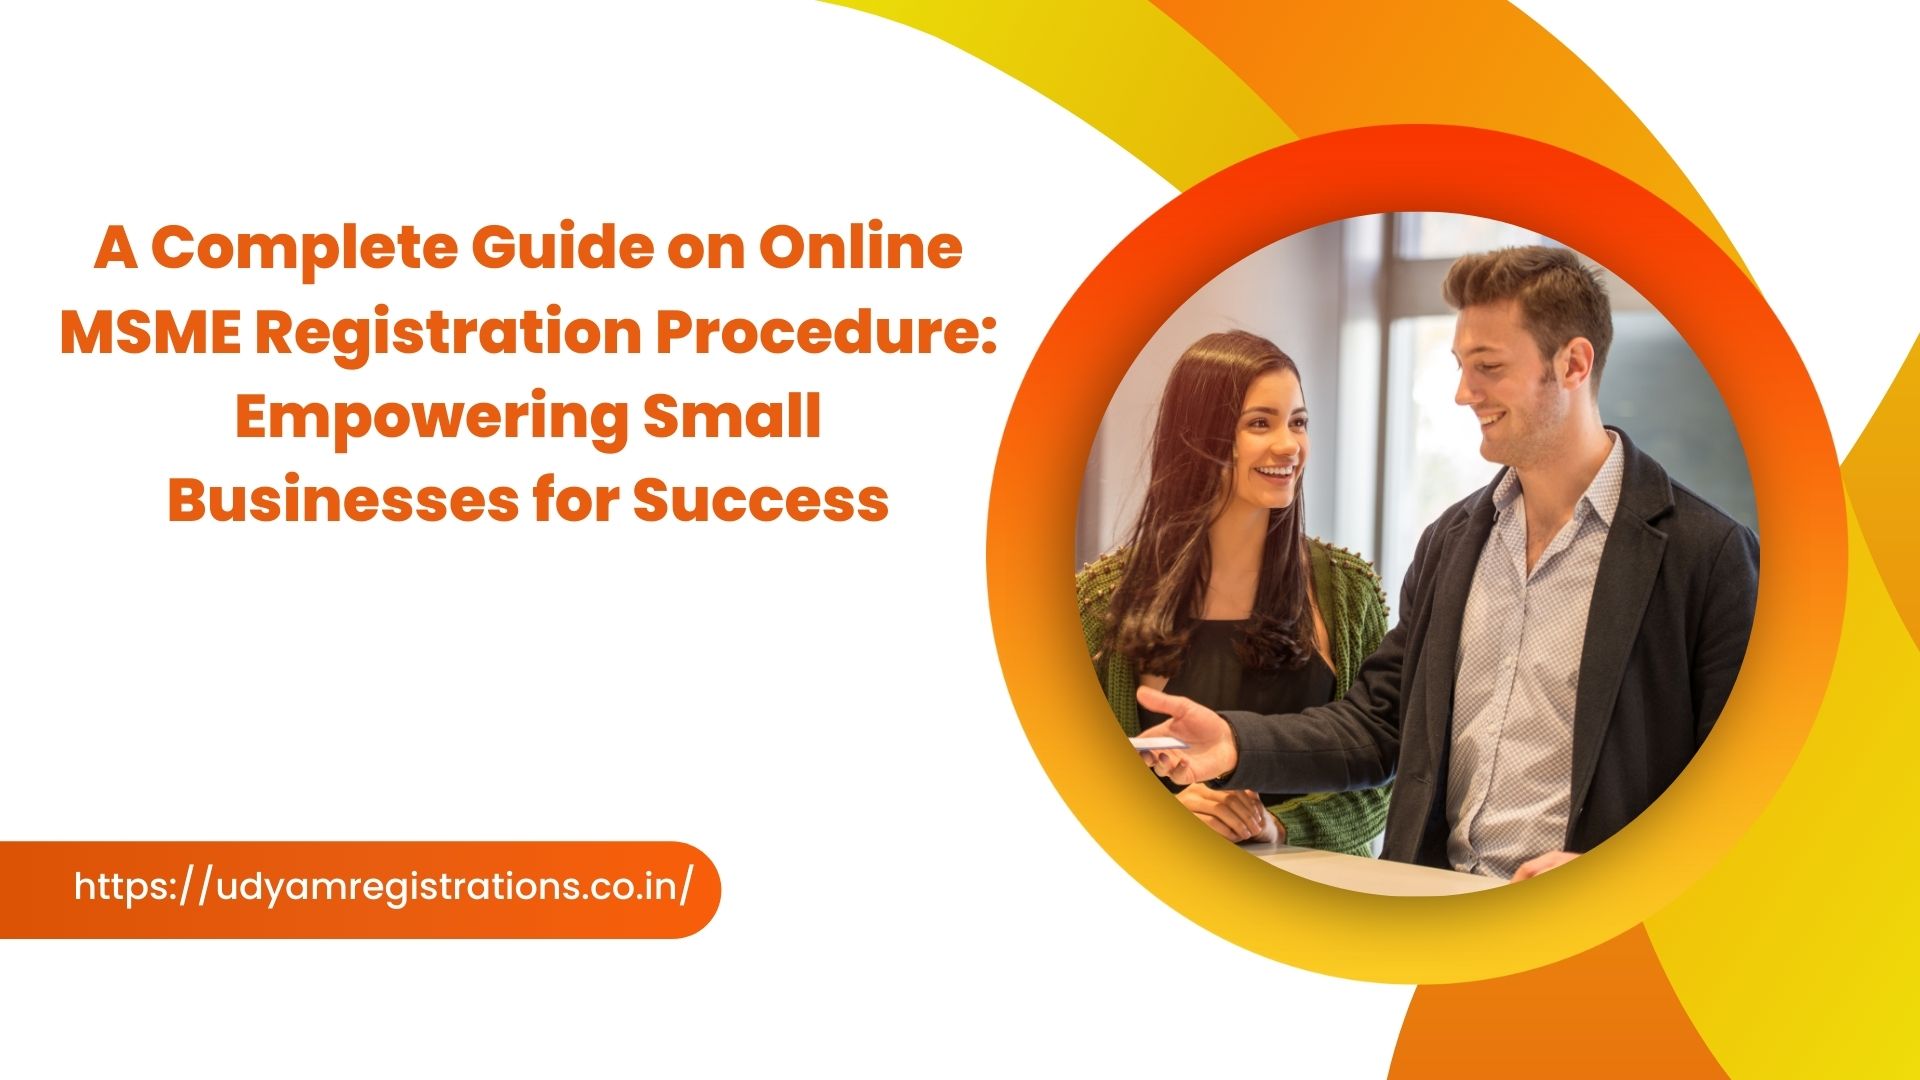 A Complete Guide on Online MSME Registration Procedure Empowering Small Businesses for Success